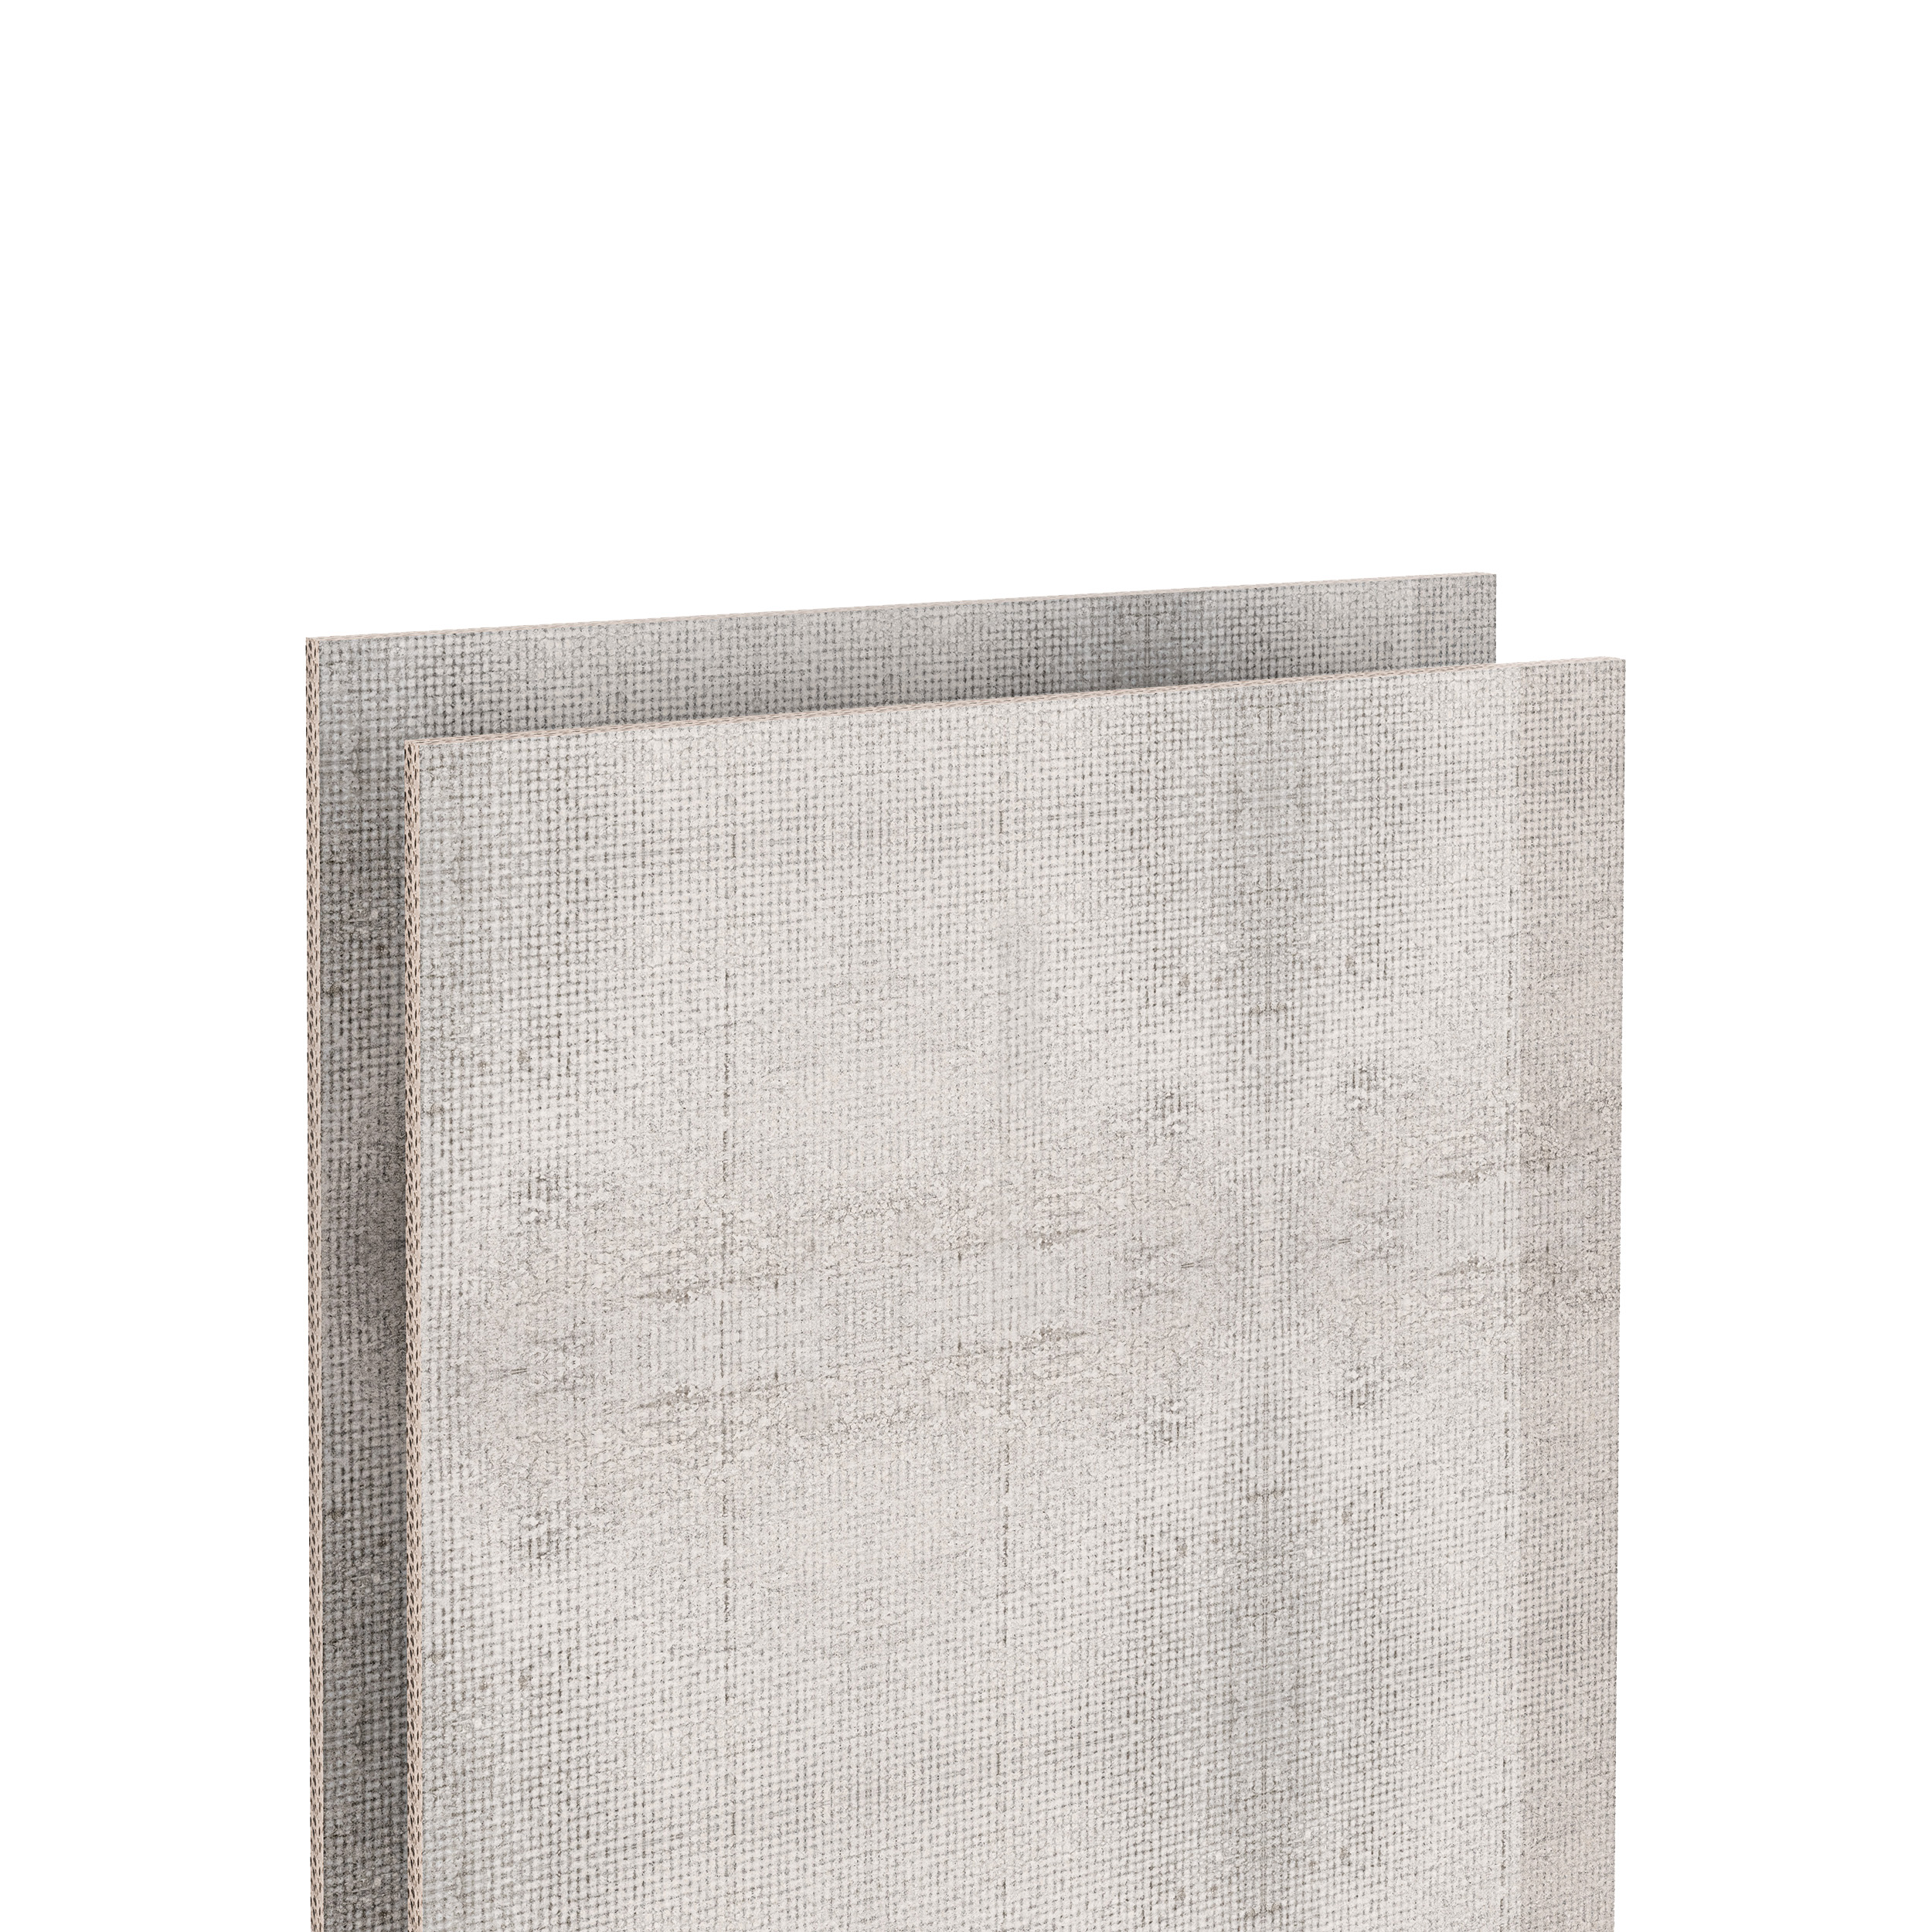 Score’N’Snap Cement Particle Board<!-- 0270FR -->